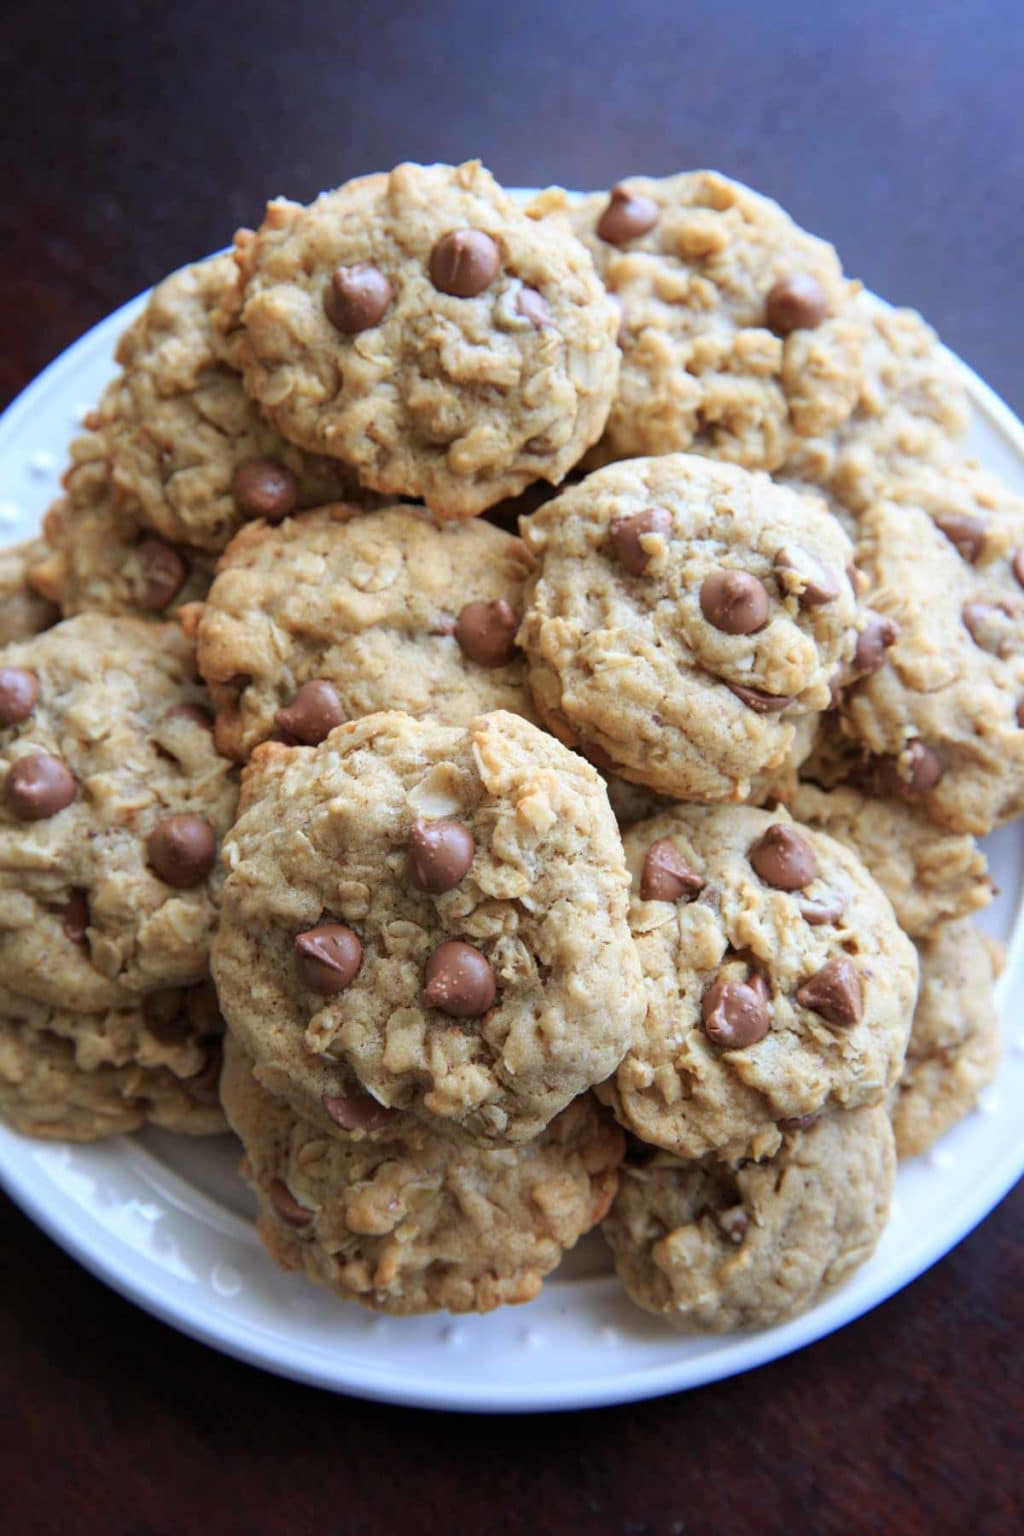 Lactation cookies with chocolate chips, oats, brewers yeast and flax meal piled on a plate